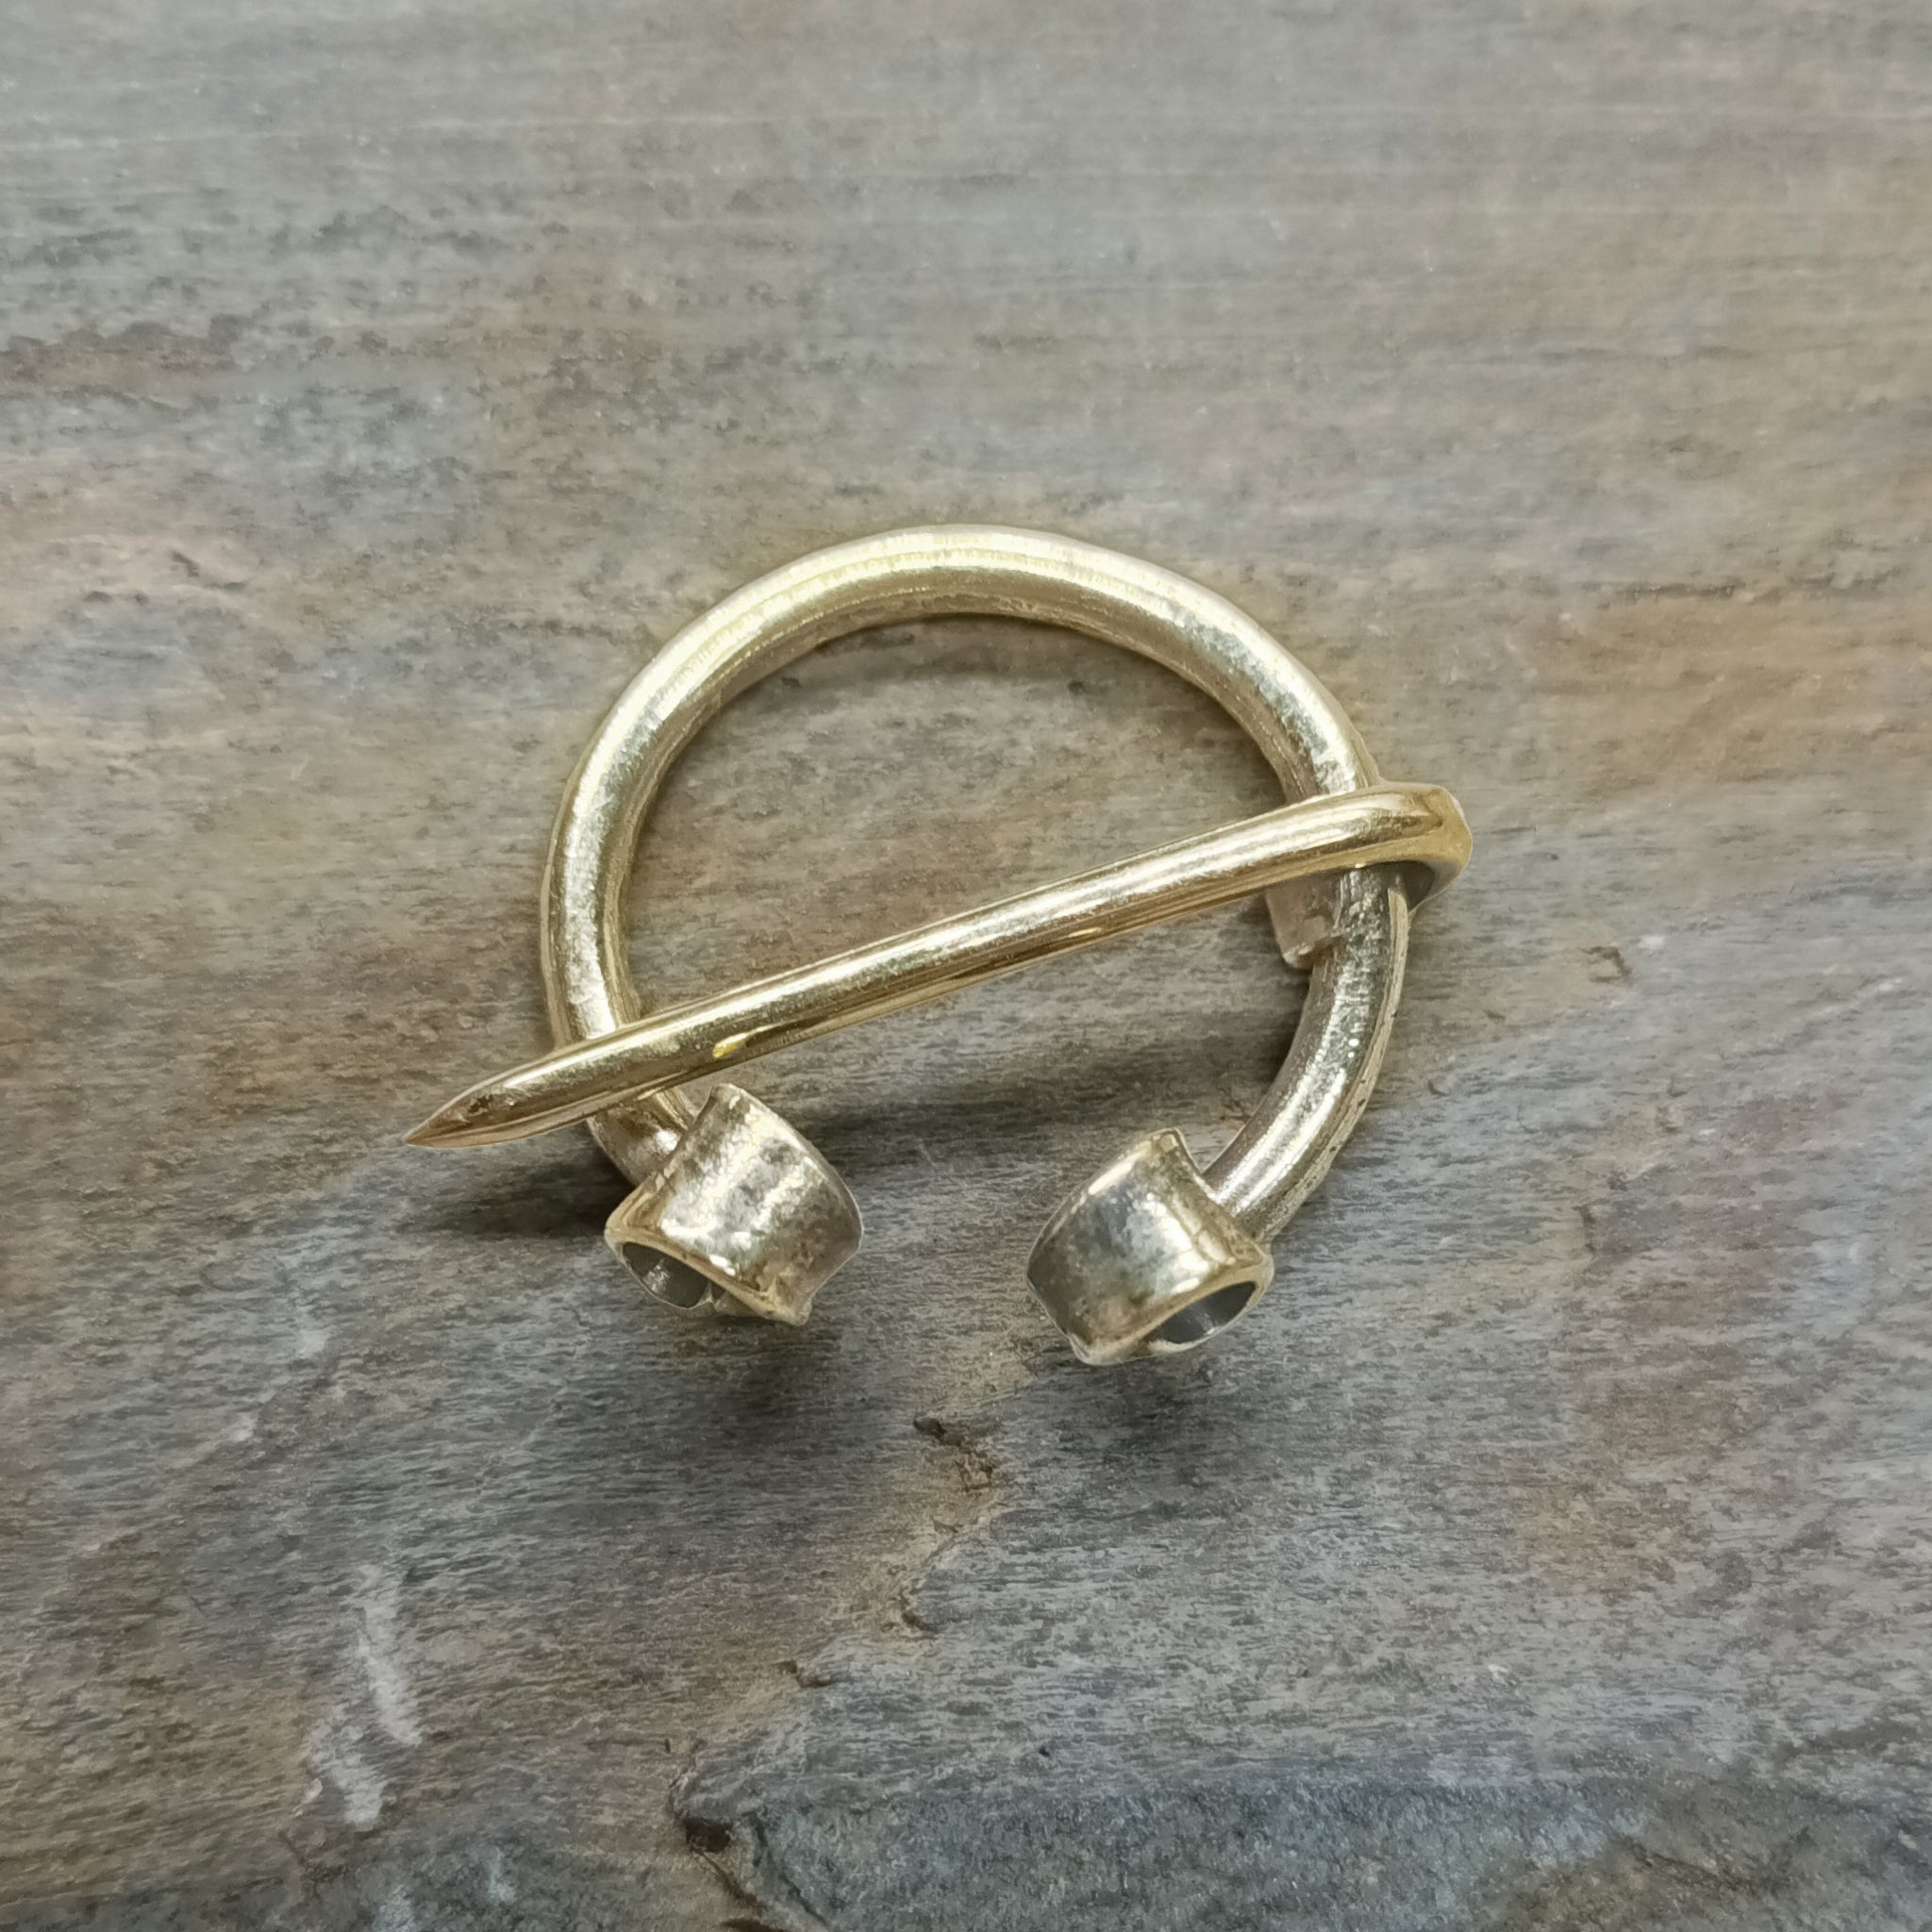 25mm Brass Cloak Pin / Clothes Pin on Rock